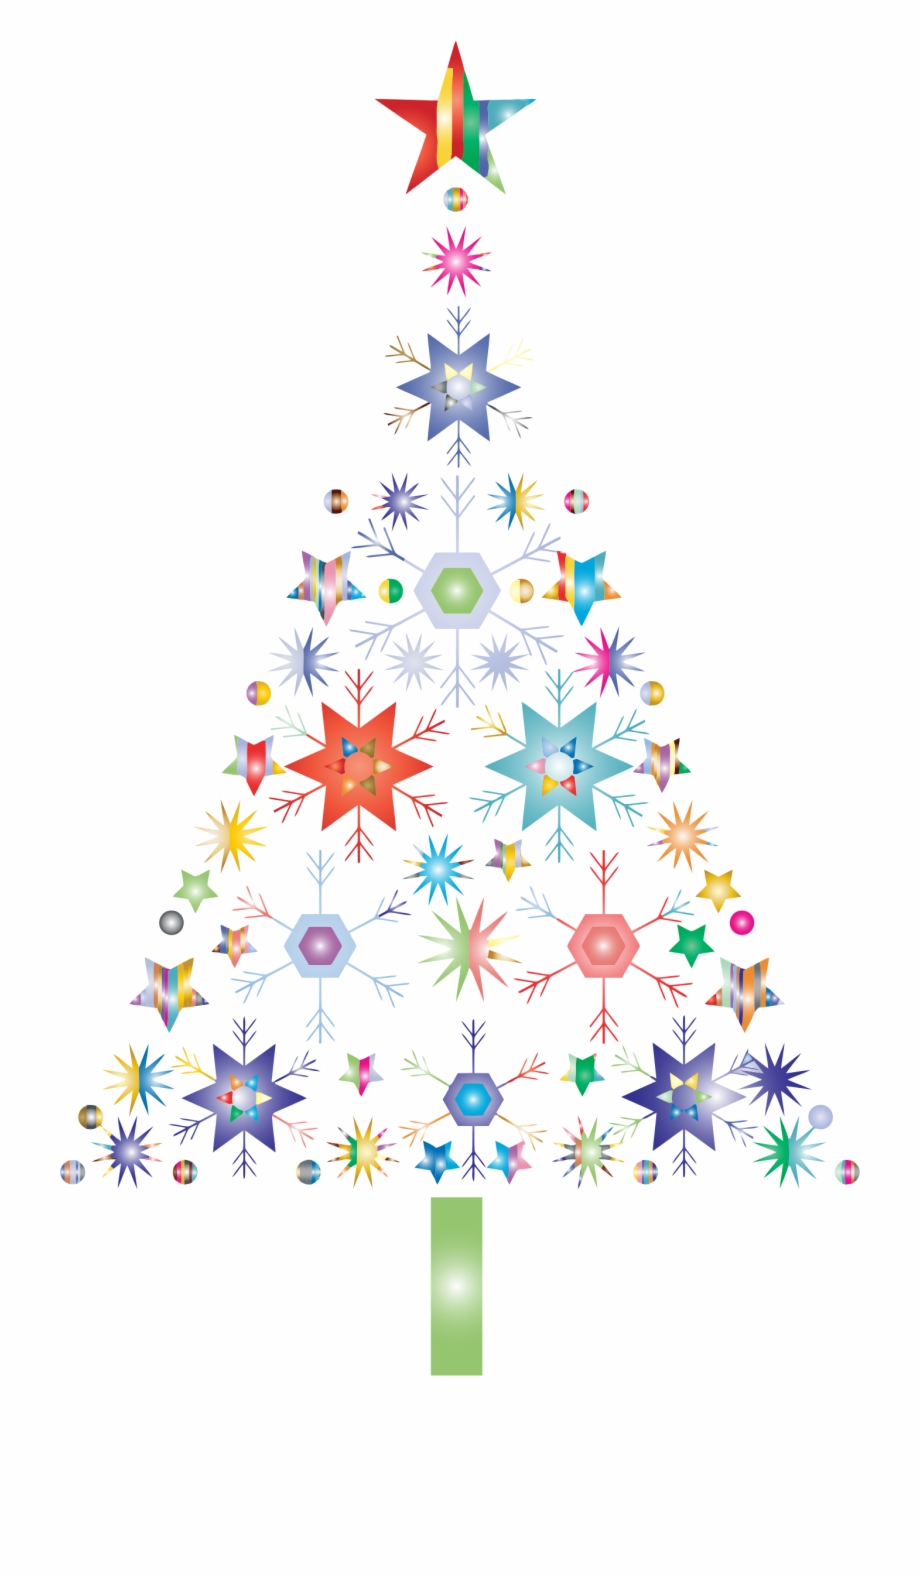 This Free Icons Png Design Of Abstract Snowflake Christmas